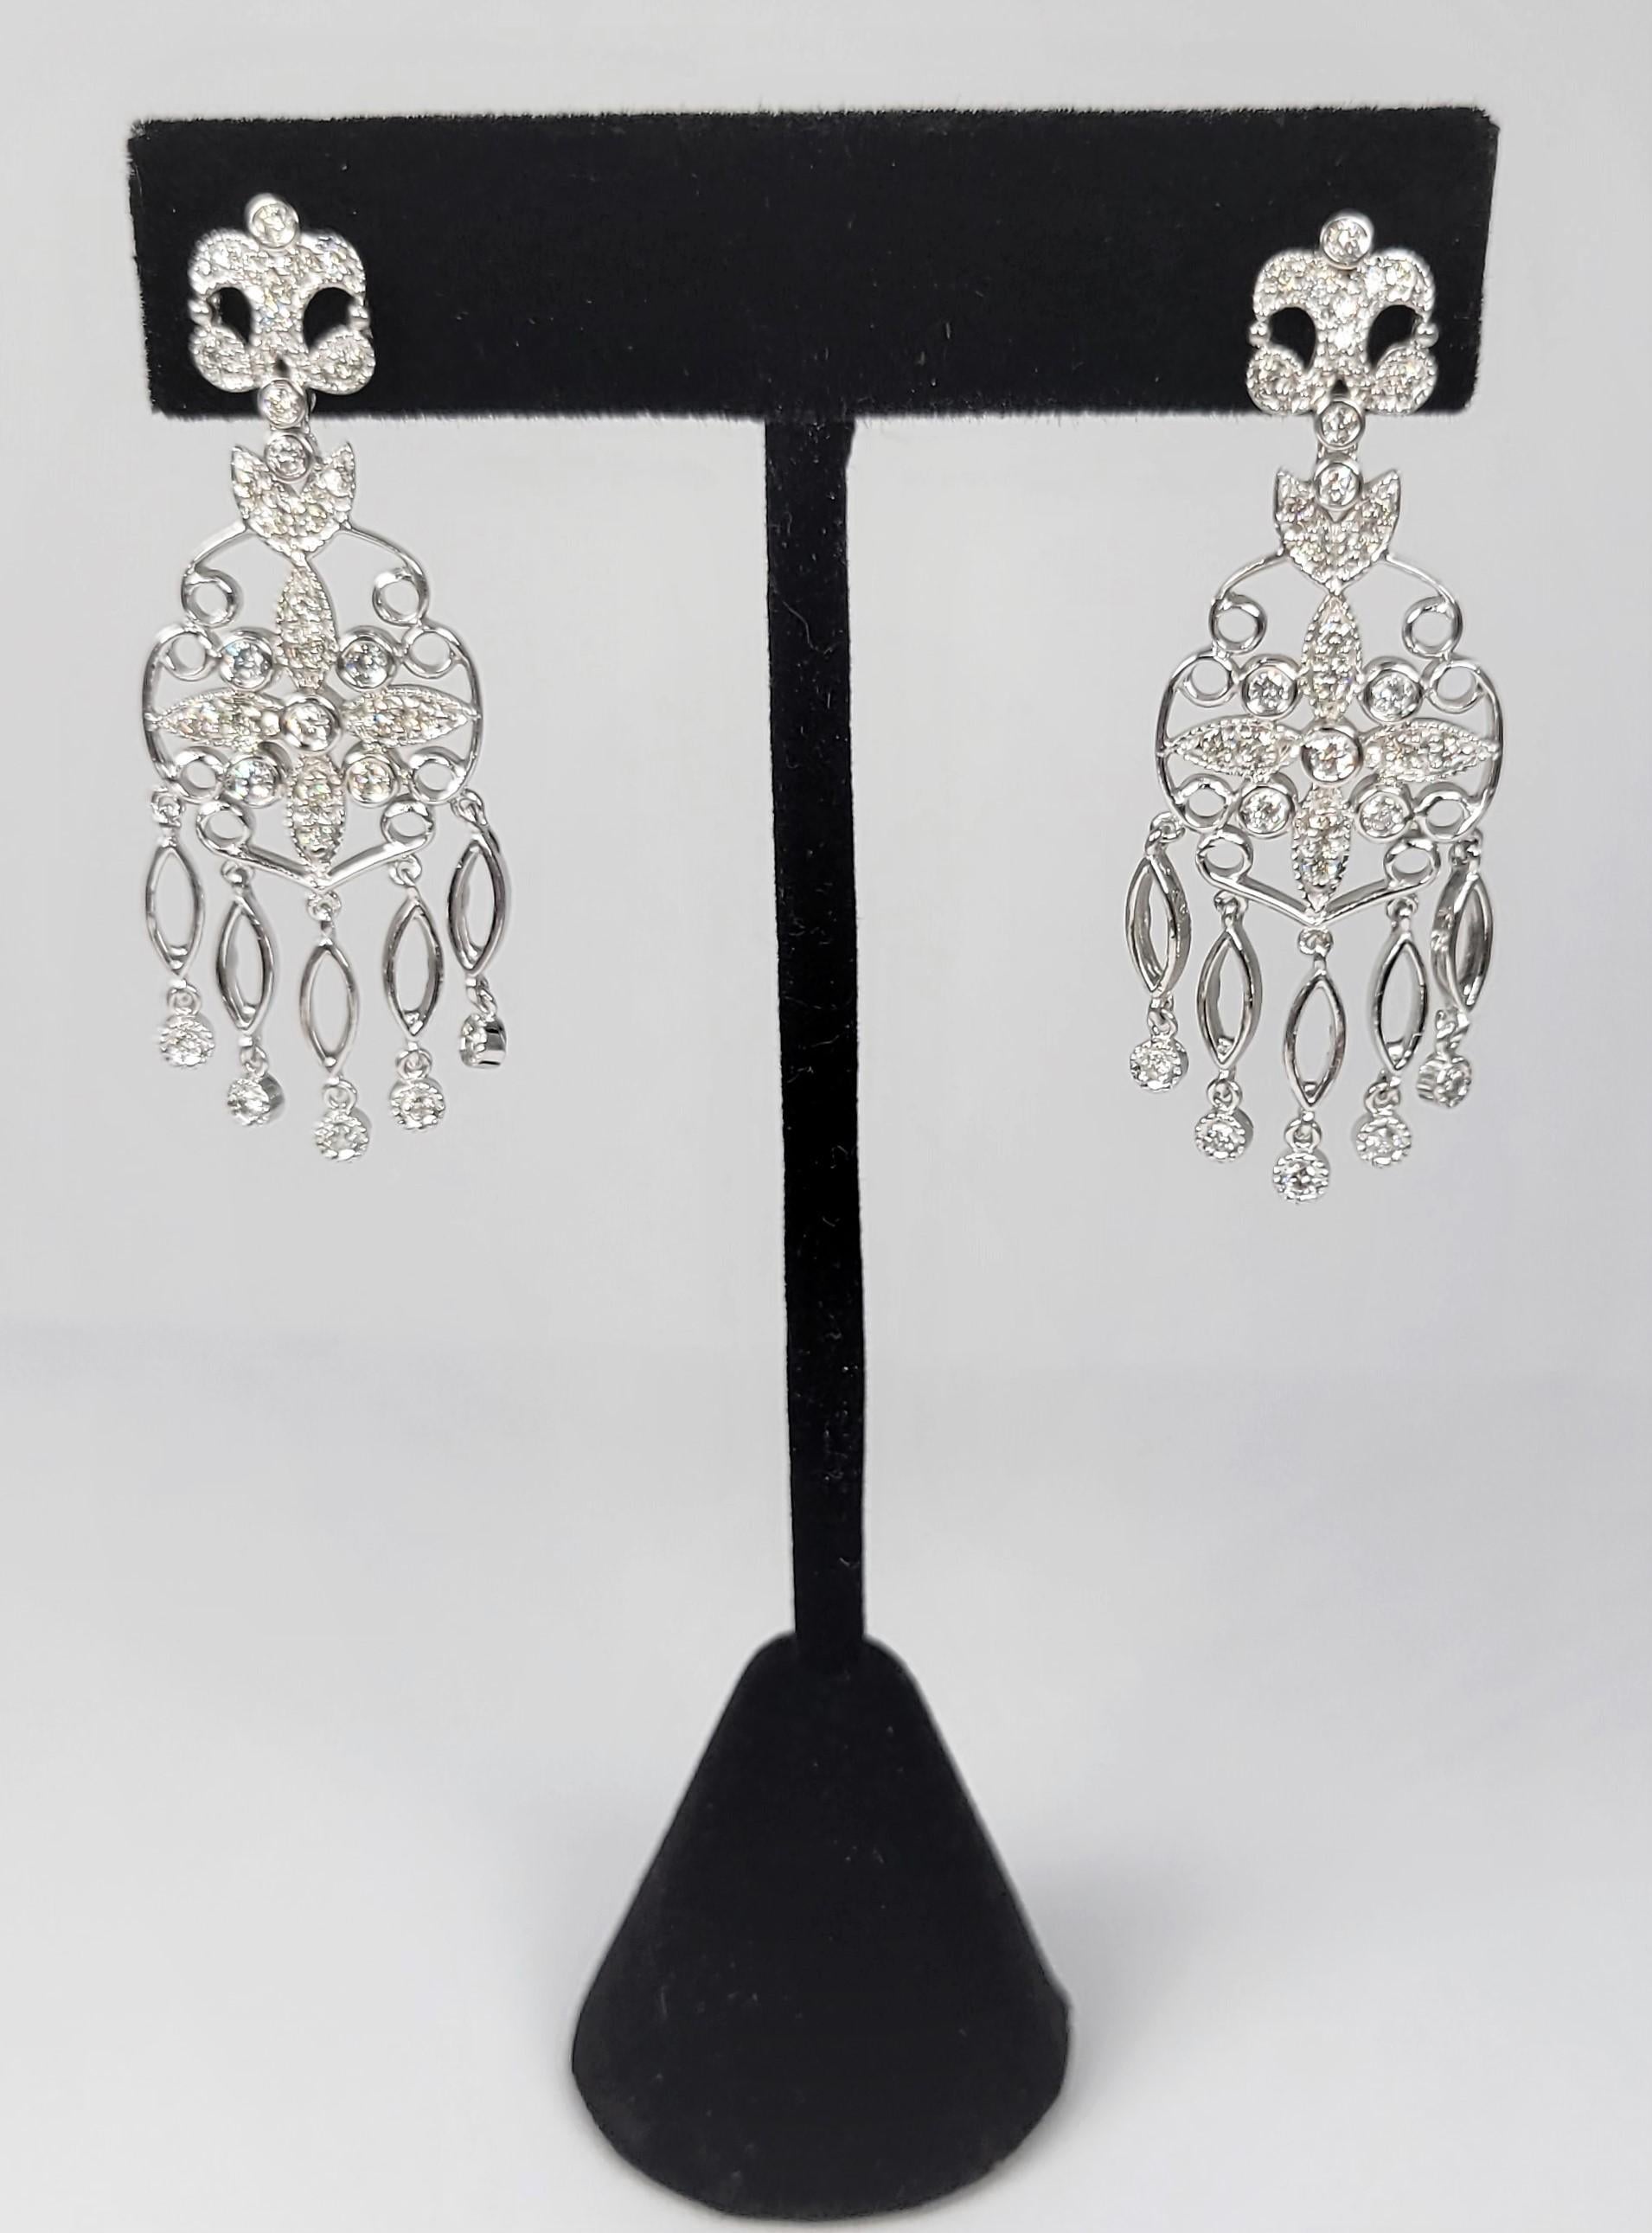 Chandelier earrings with 0.60 carats of diamonds in 14 karat white gold.  The perfect compliment to any black tie affair!